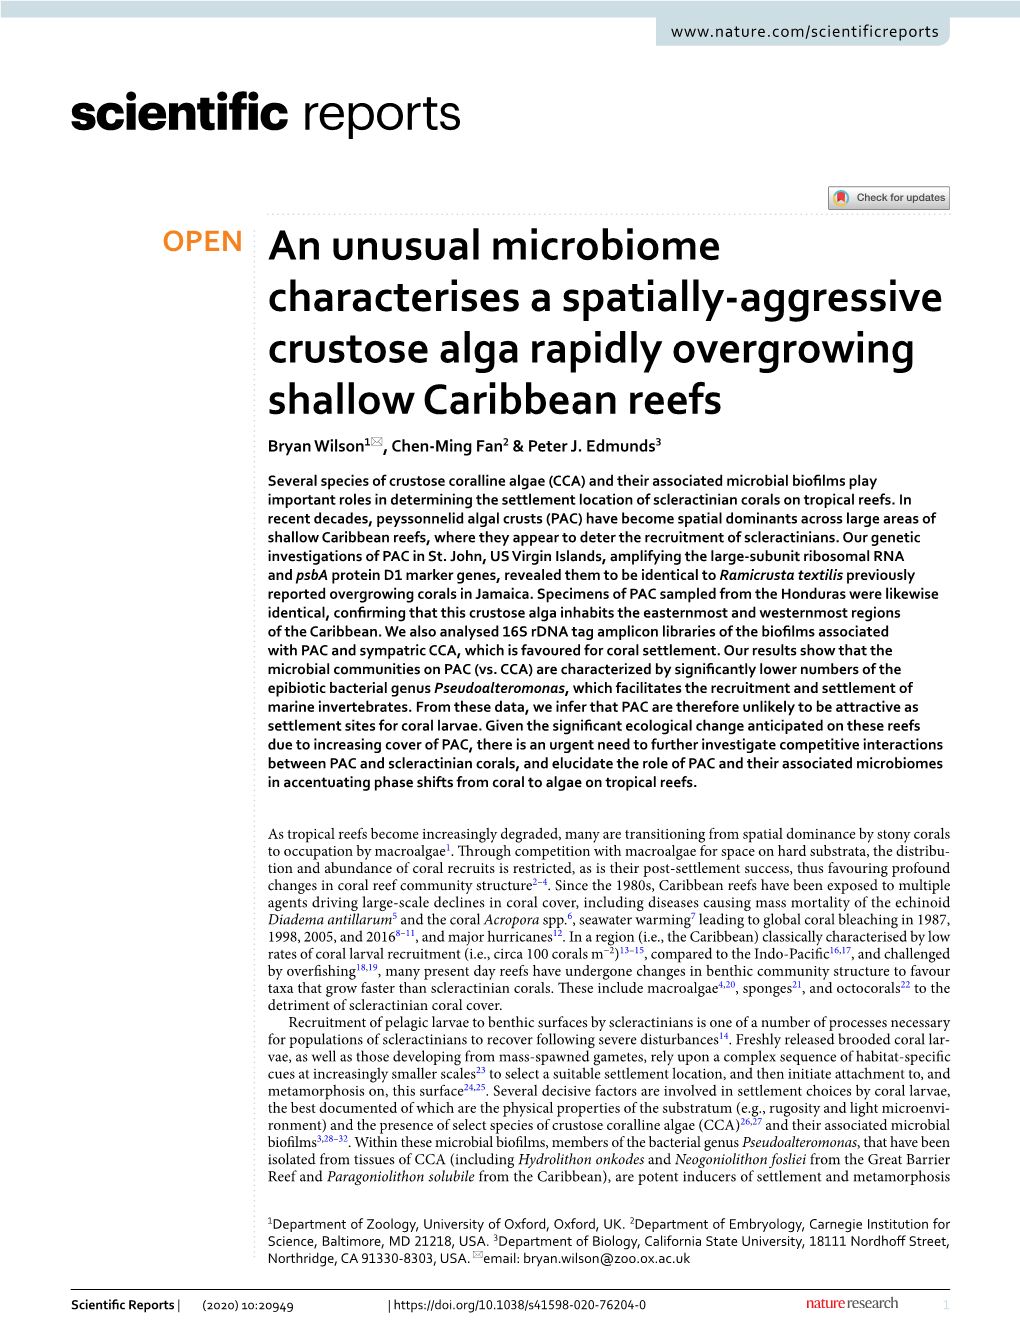 An Unusual Microbiome Characterises a Spatially-Aggressive Crustose Alga Rapidly Overgrowing Shallow Caribbean Reefs